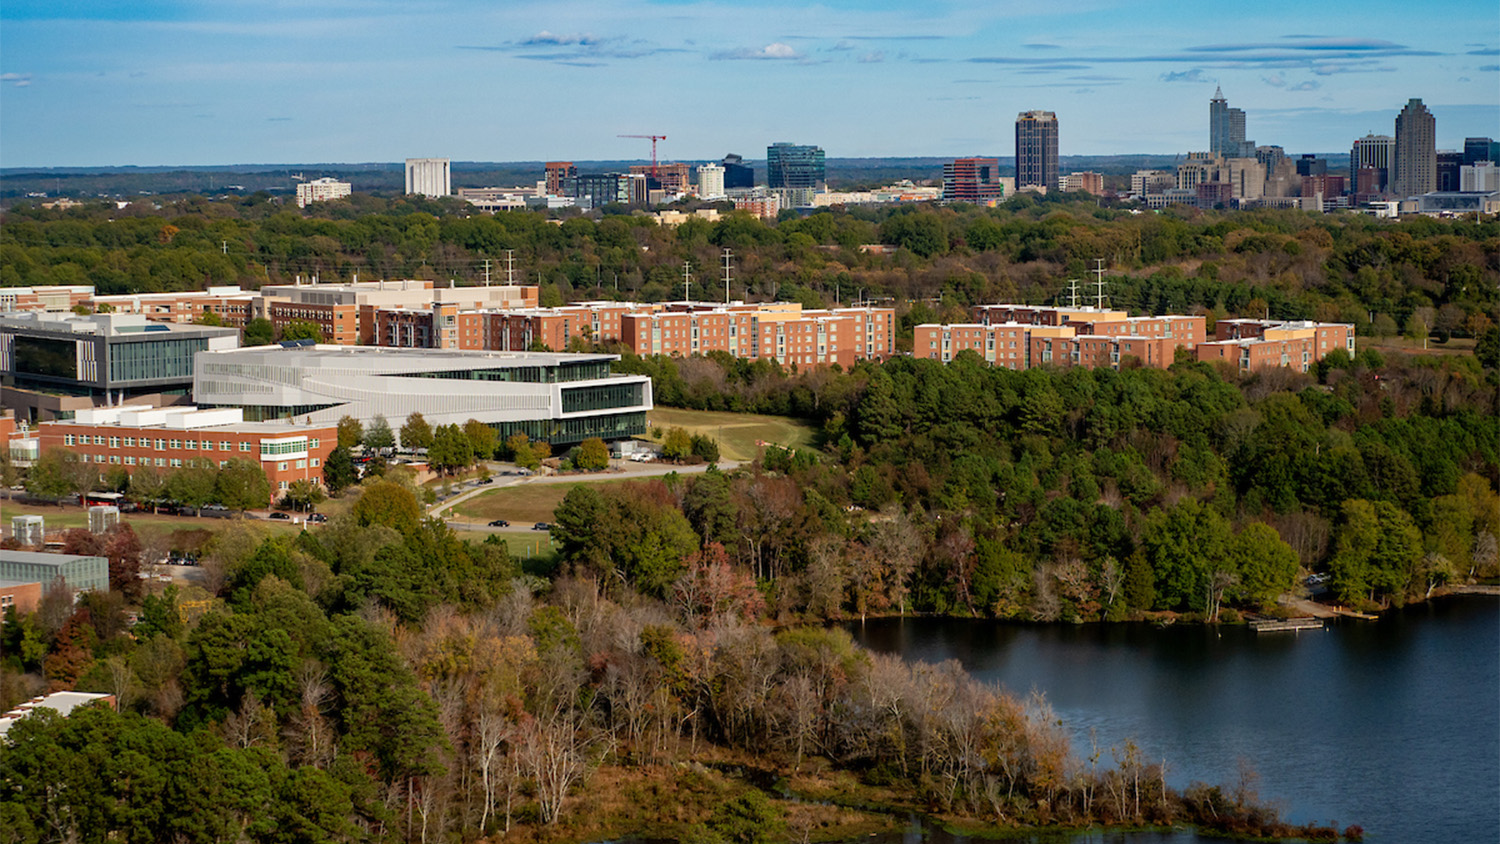 Aerial view of Centennial campus with downtown Raleigh in the background